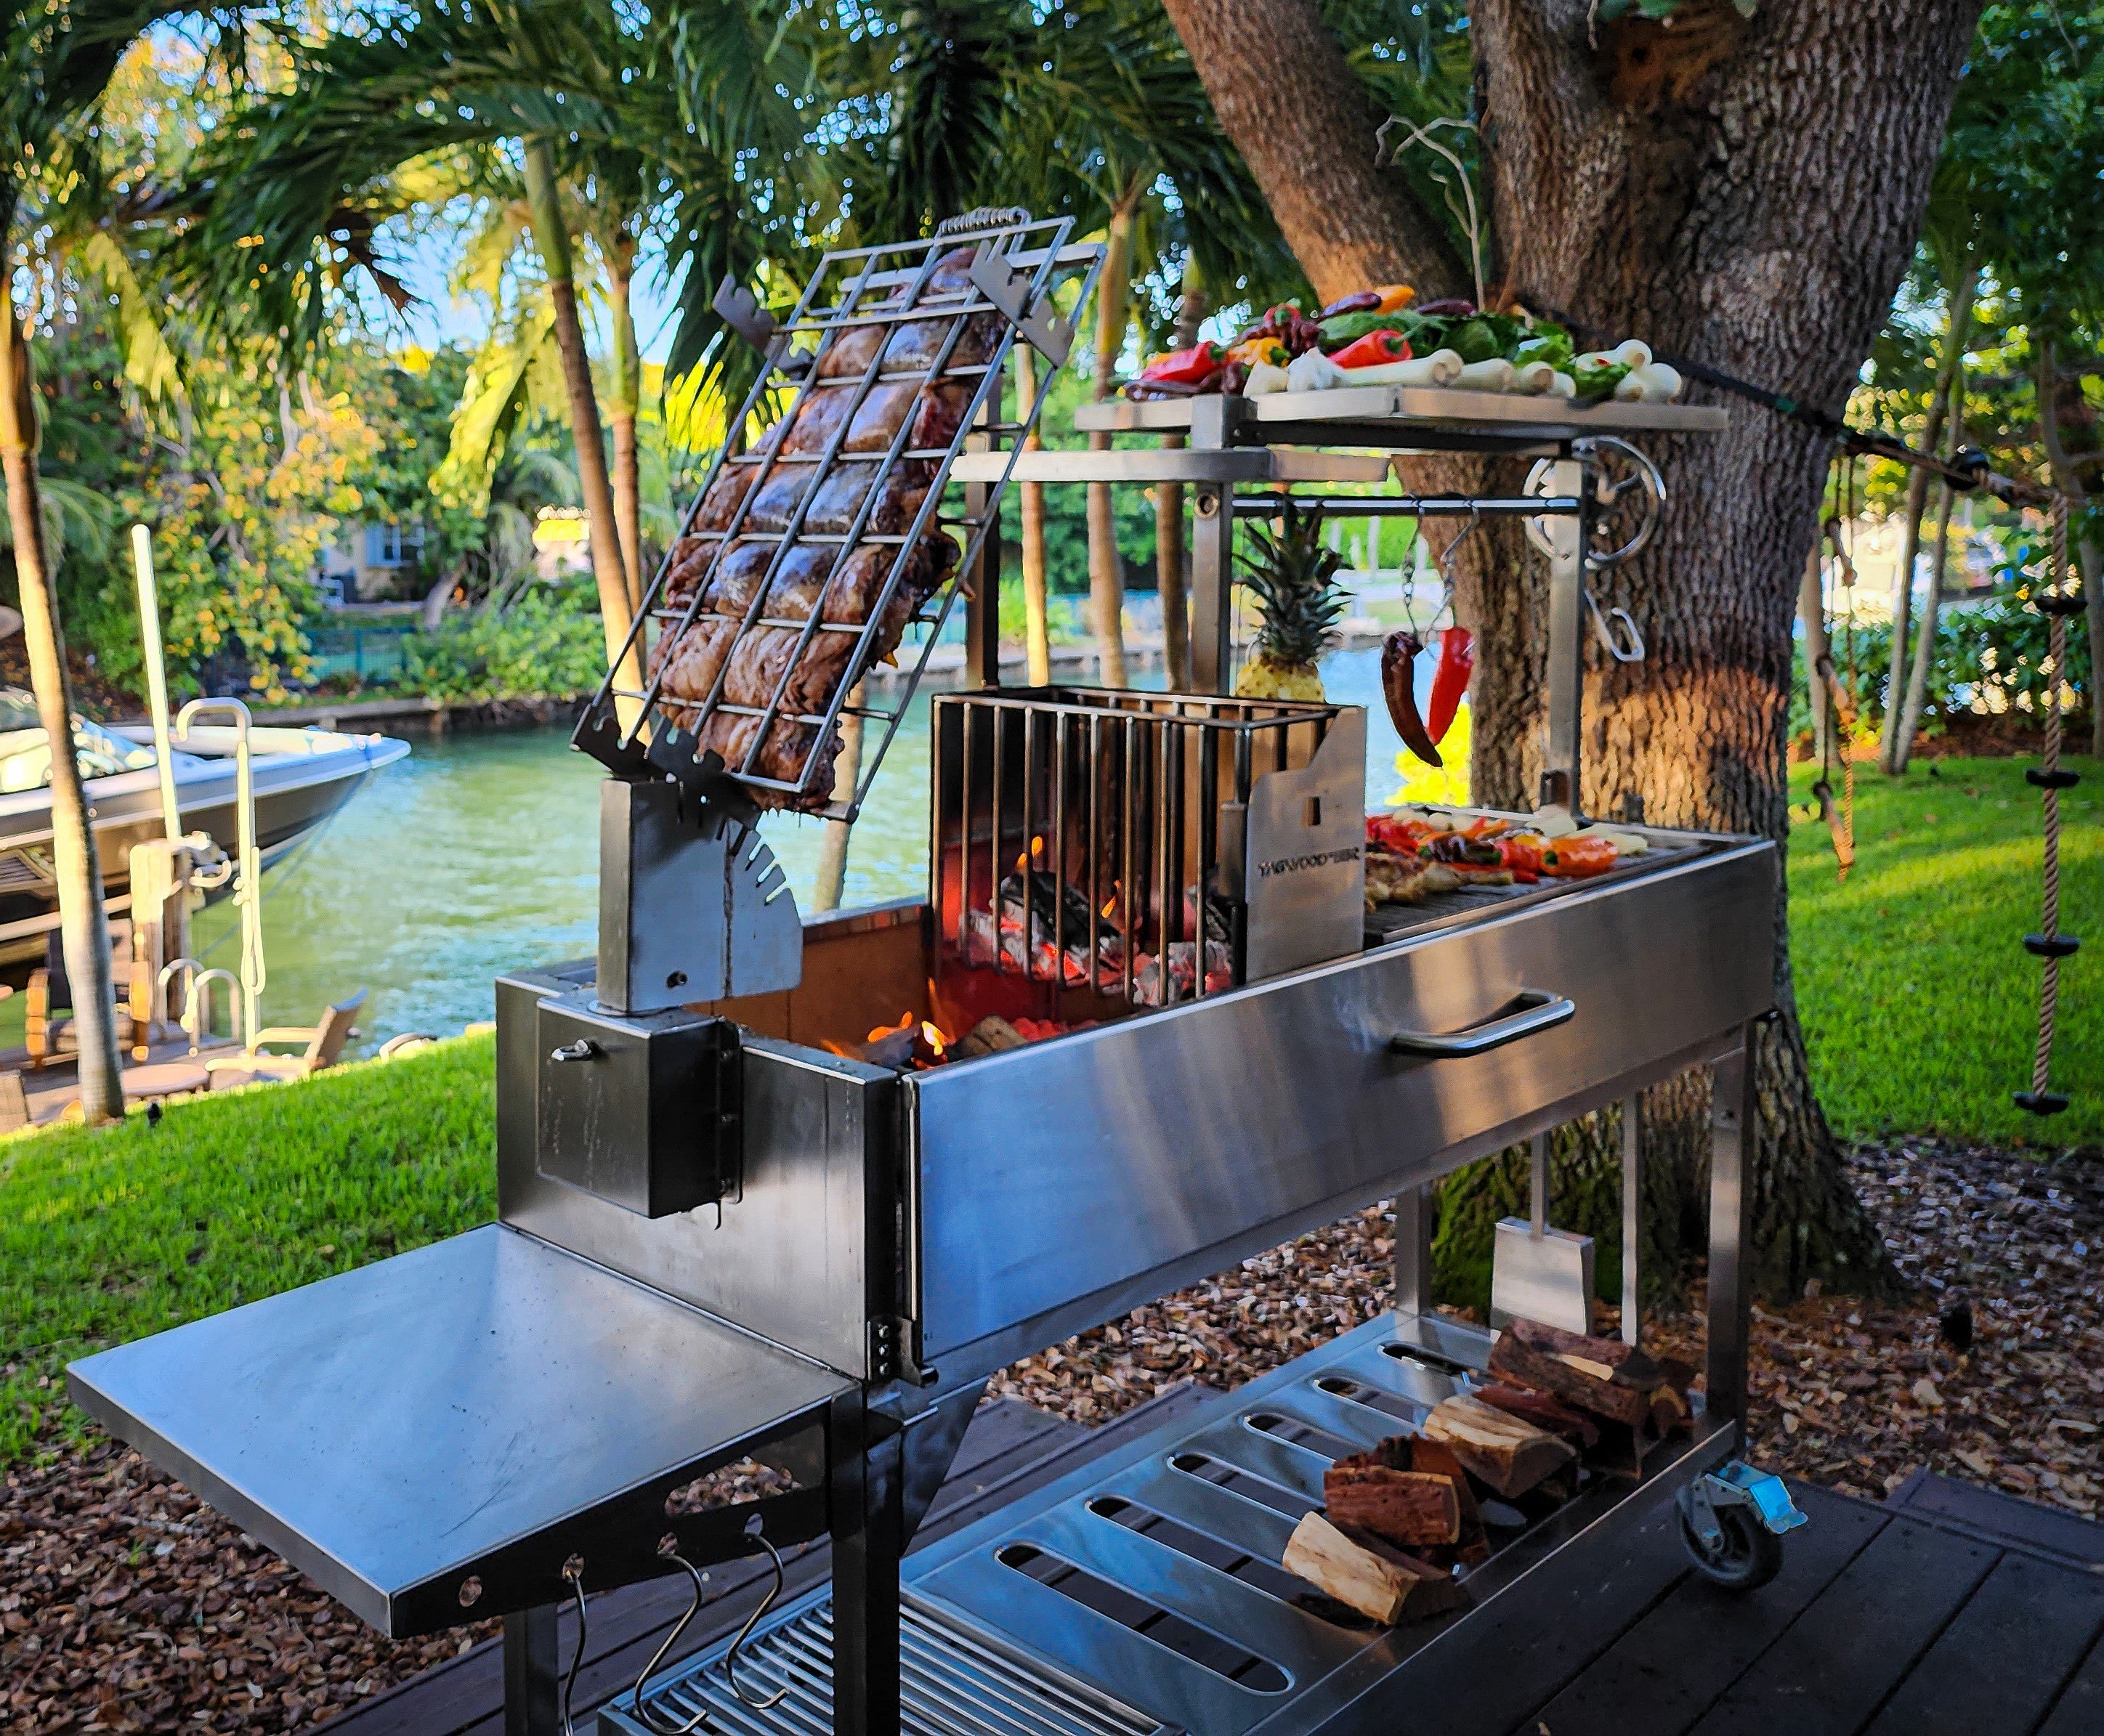 Tradition meets precision with our all-new Argentine grill! Complete with a  heavy-duty adjustable grate, s-hooks for hanging meat and fir